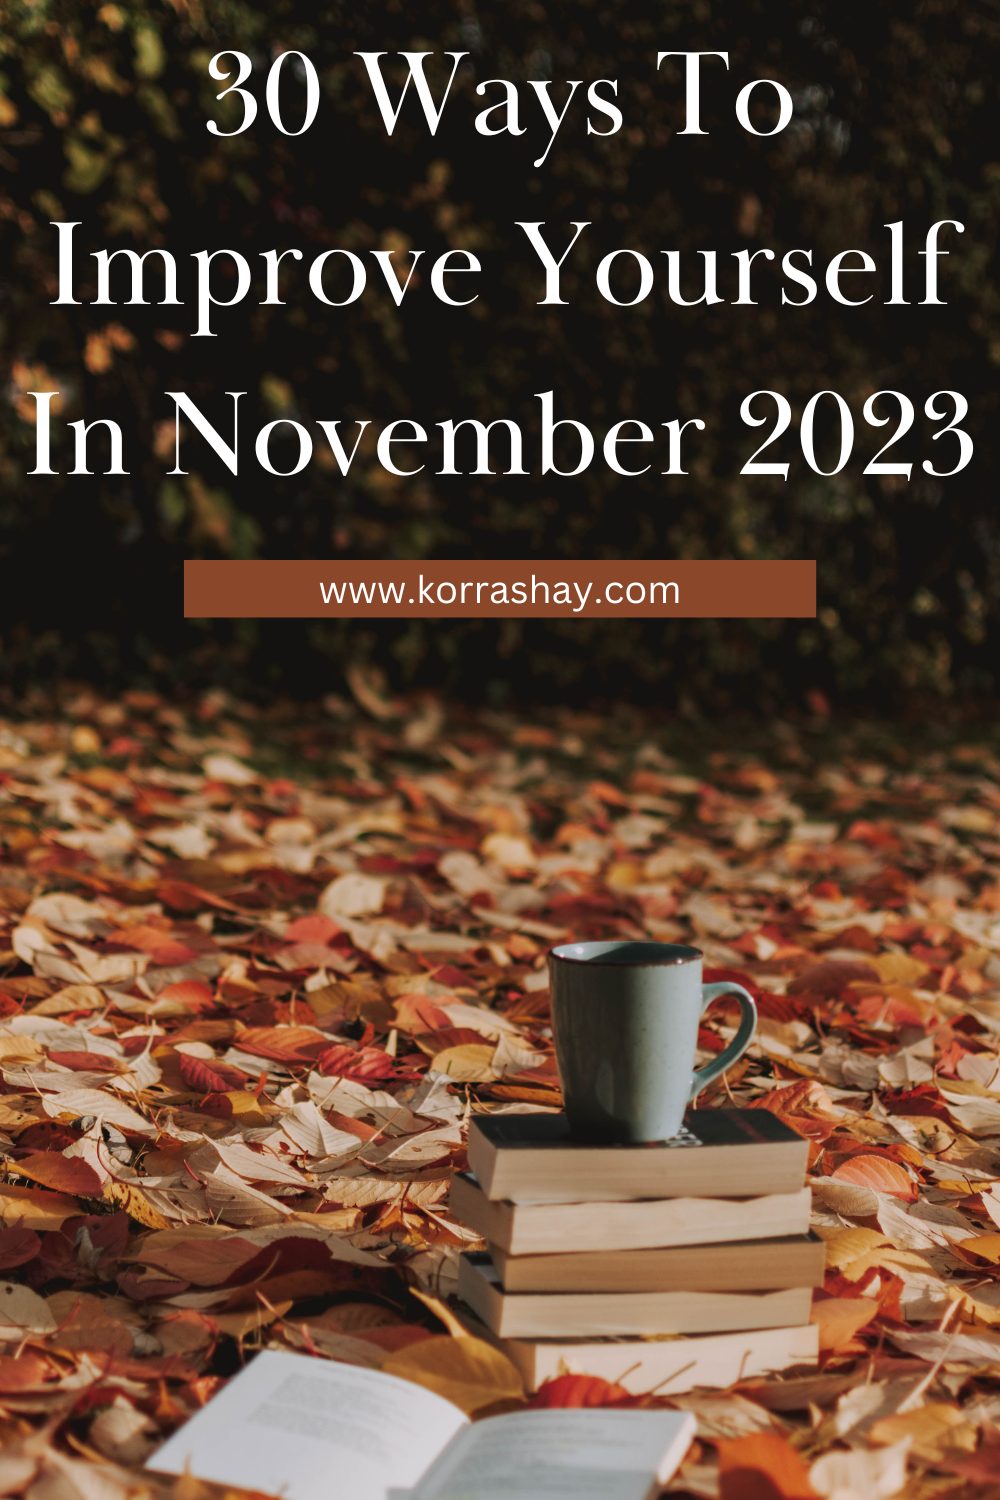 30 Ways To Improve Yourself In November 2023